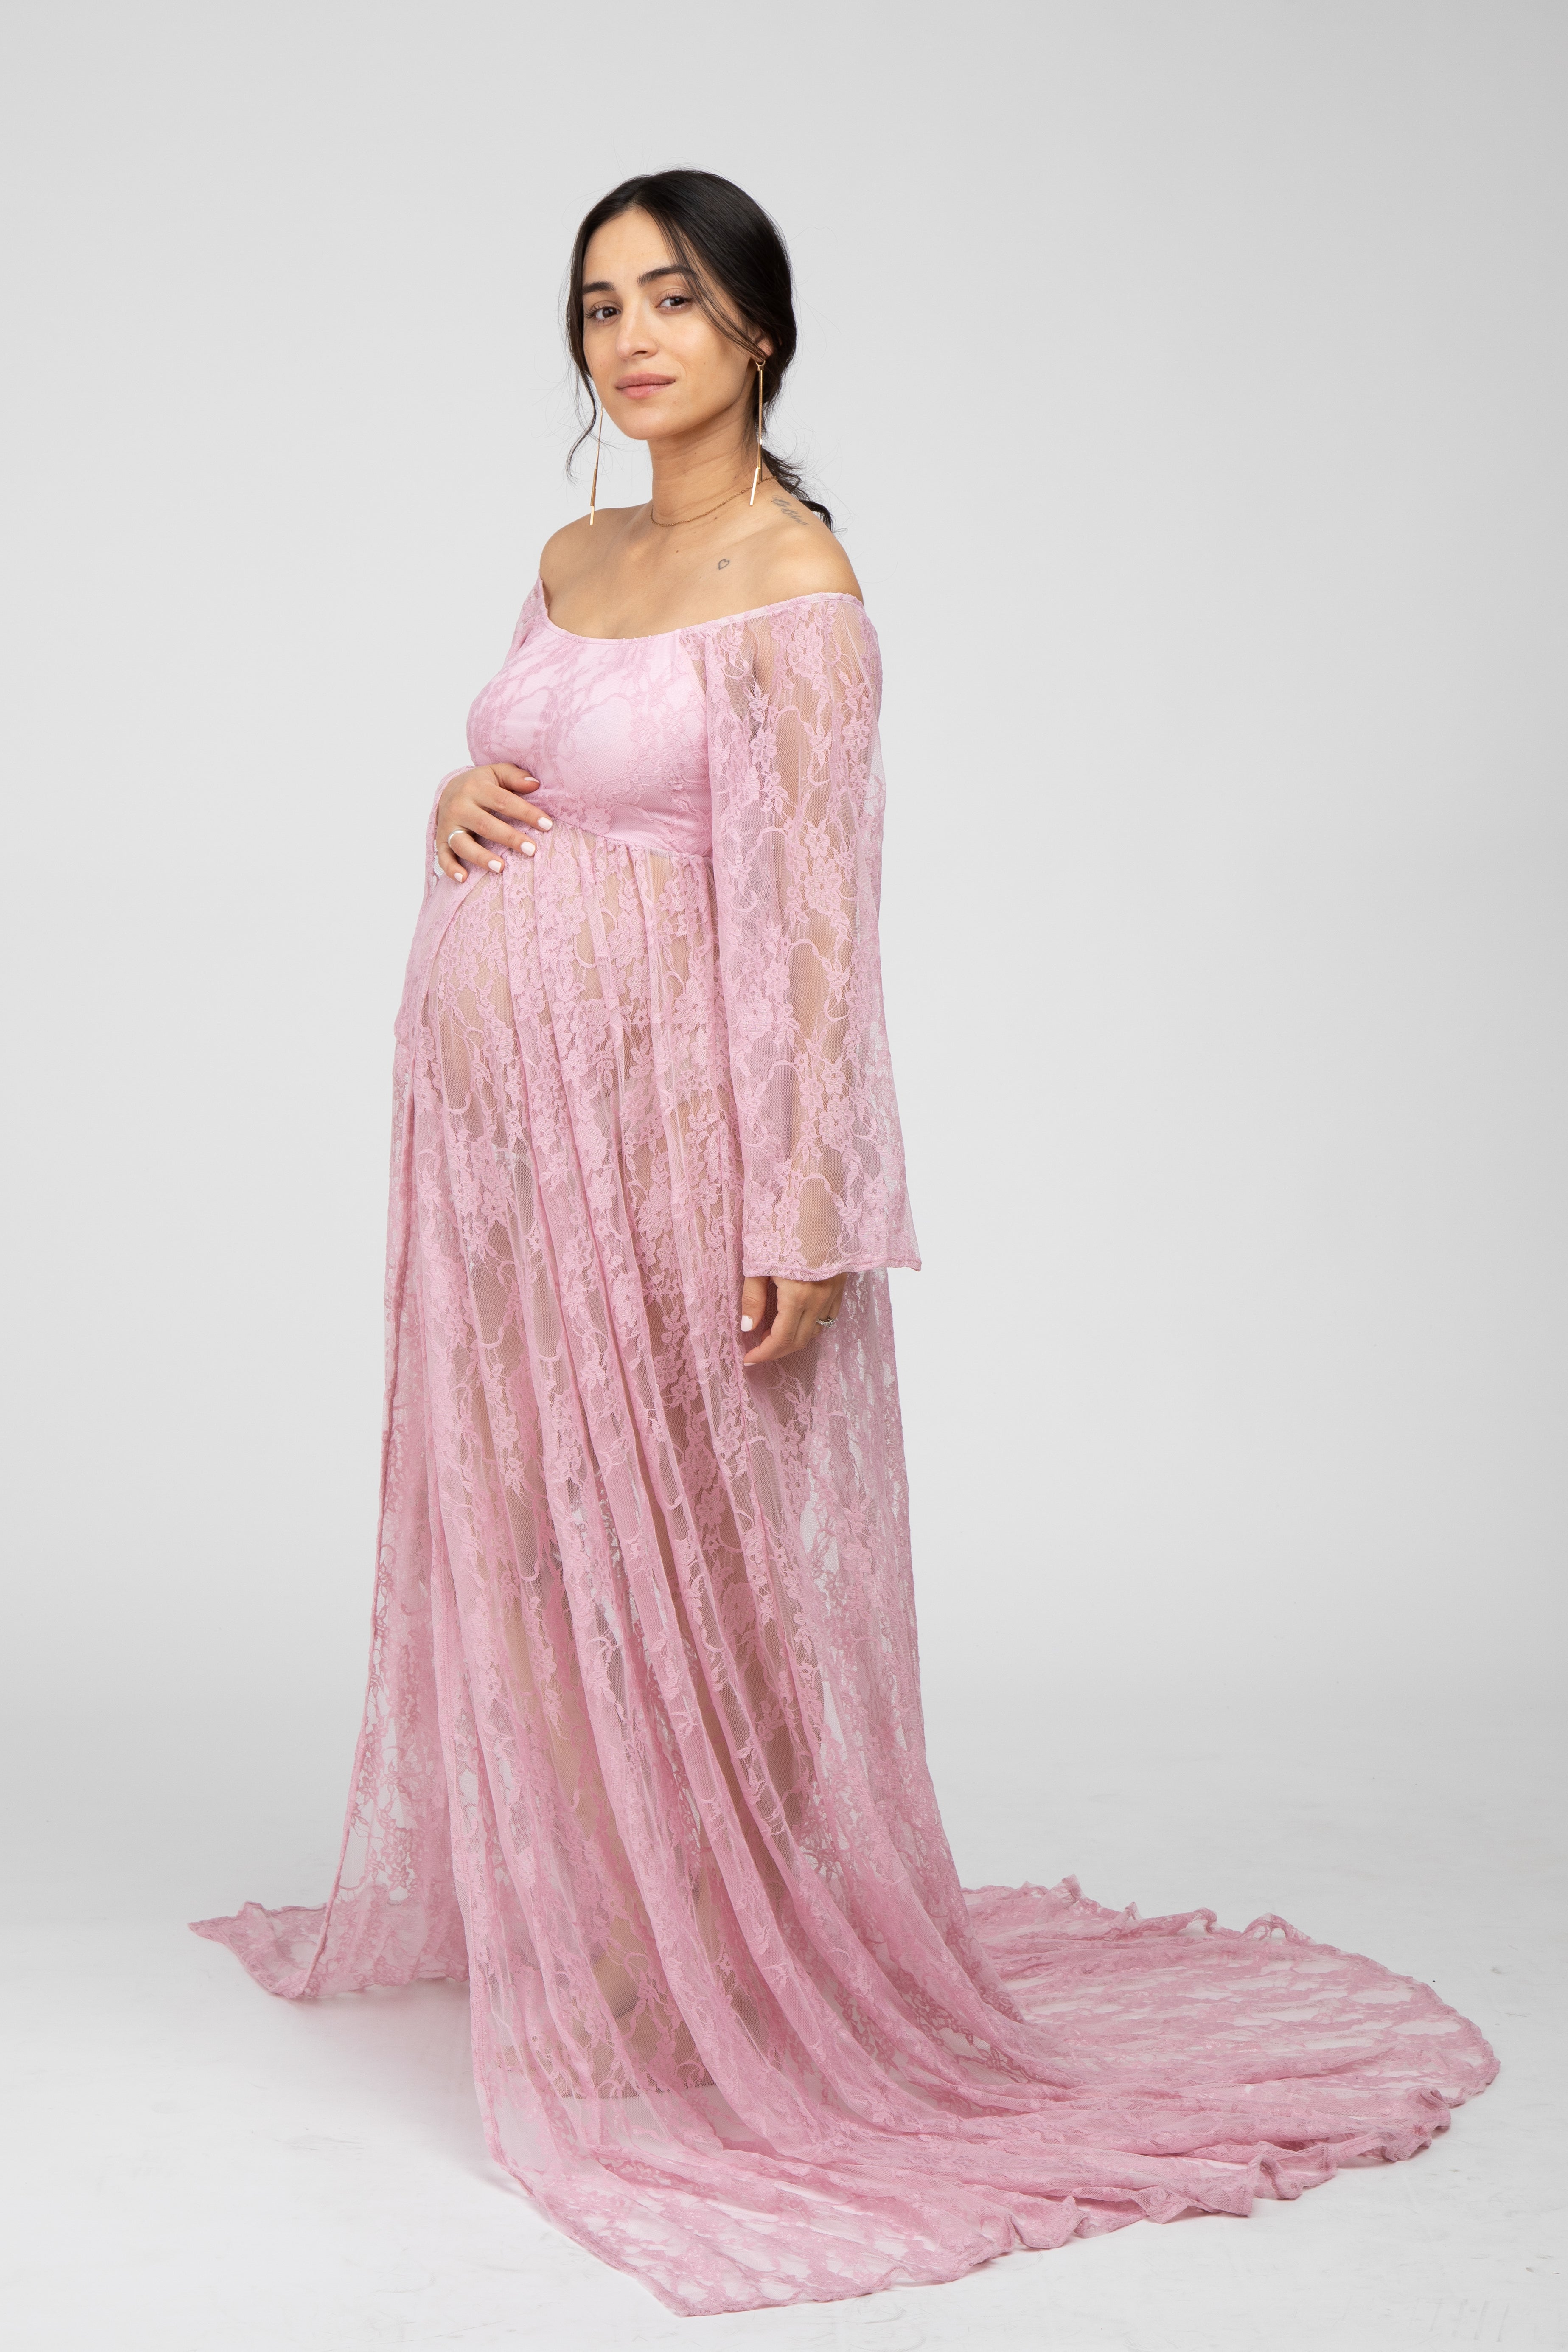 Ivory Lace Off Shoulder Maternity Photoshoot Gown/Dress– PinkBlush